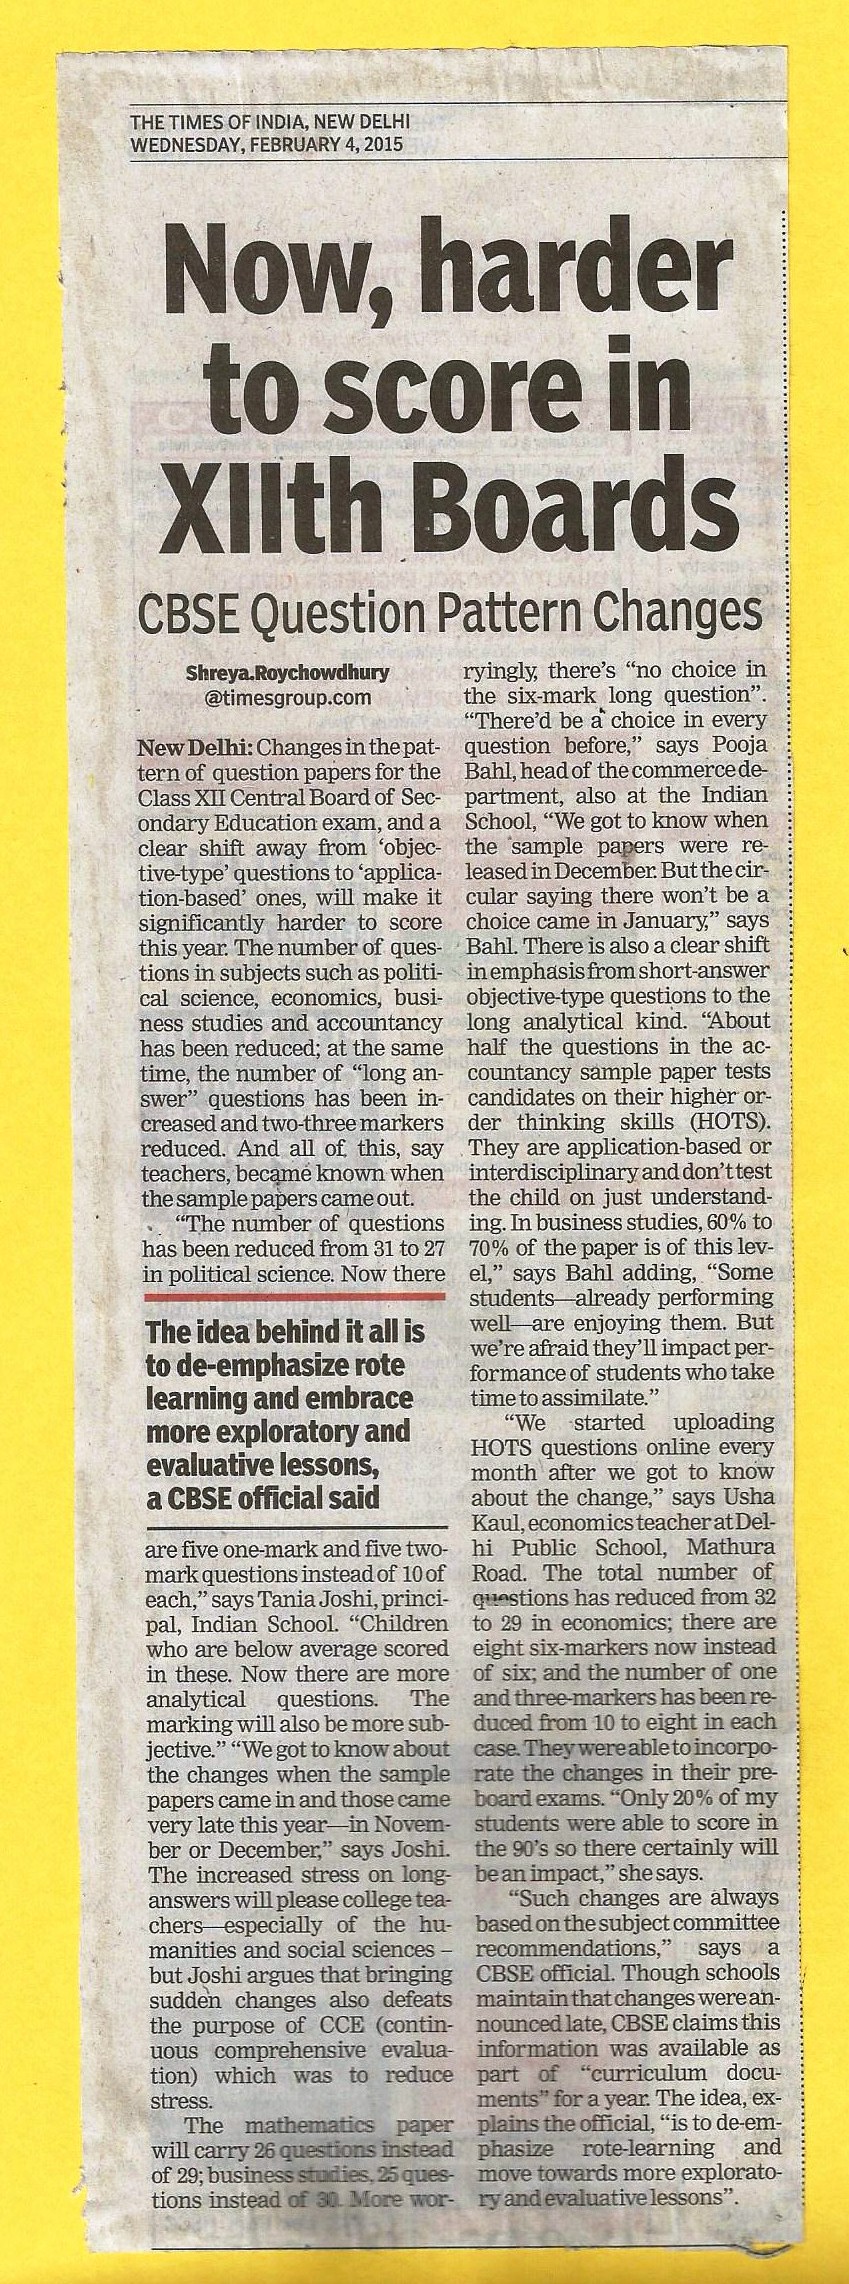 THE TIMES OF INDIA, WEDNESDAY, 04 FEBRUARY,2015